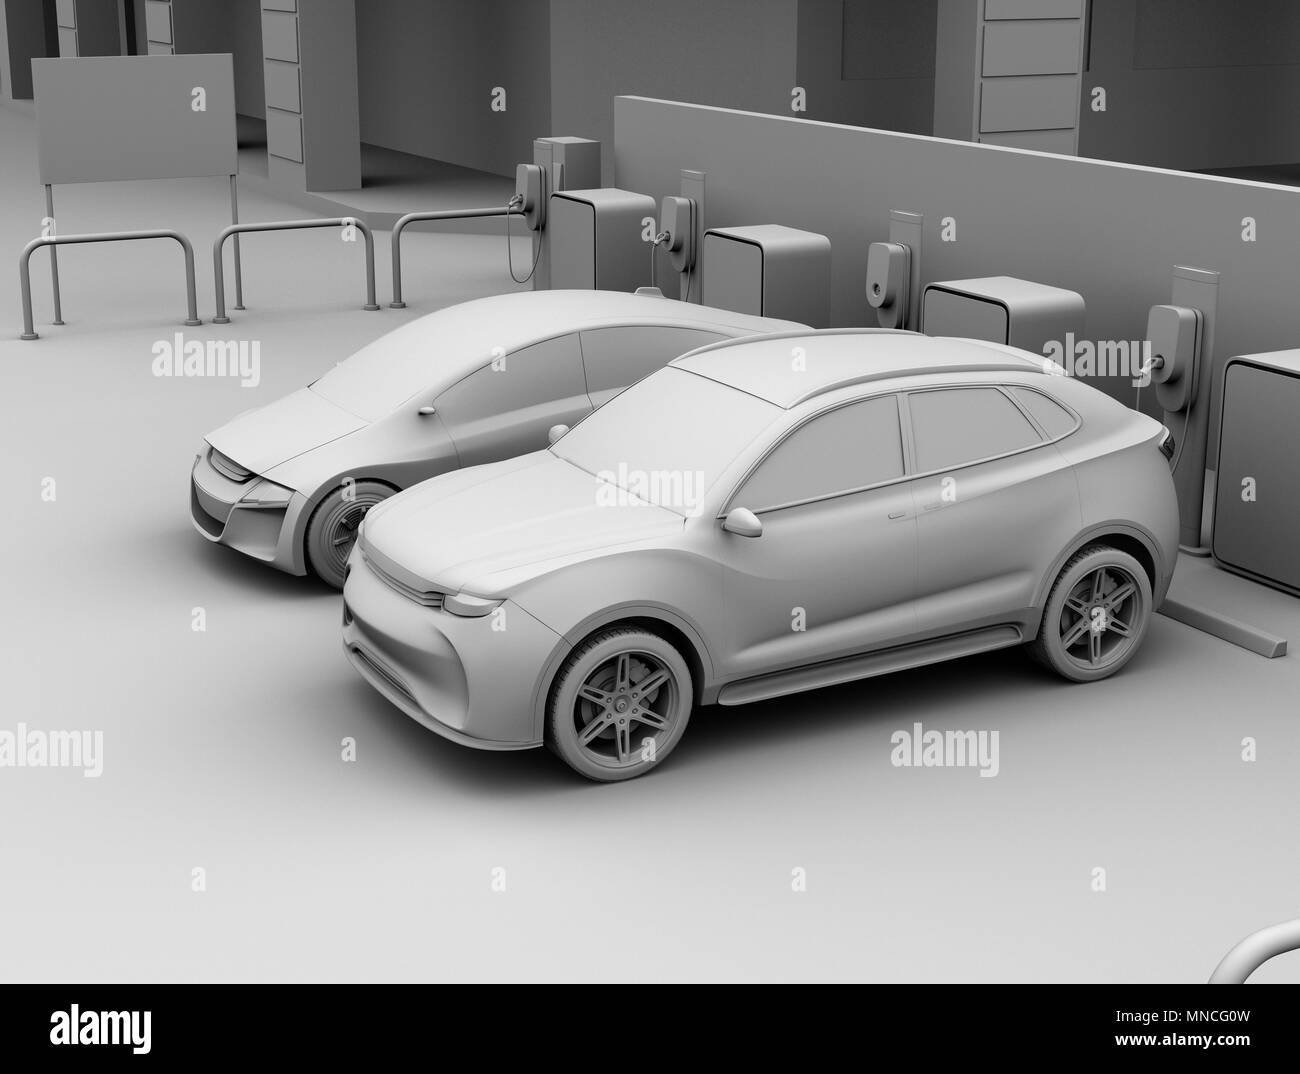 Clay rendering of electric SUV and self-driving sedan in car share parking lot. 3D rendering image. Stock Photo